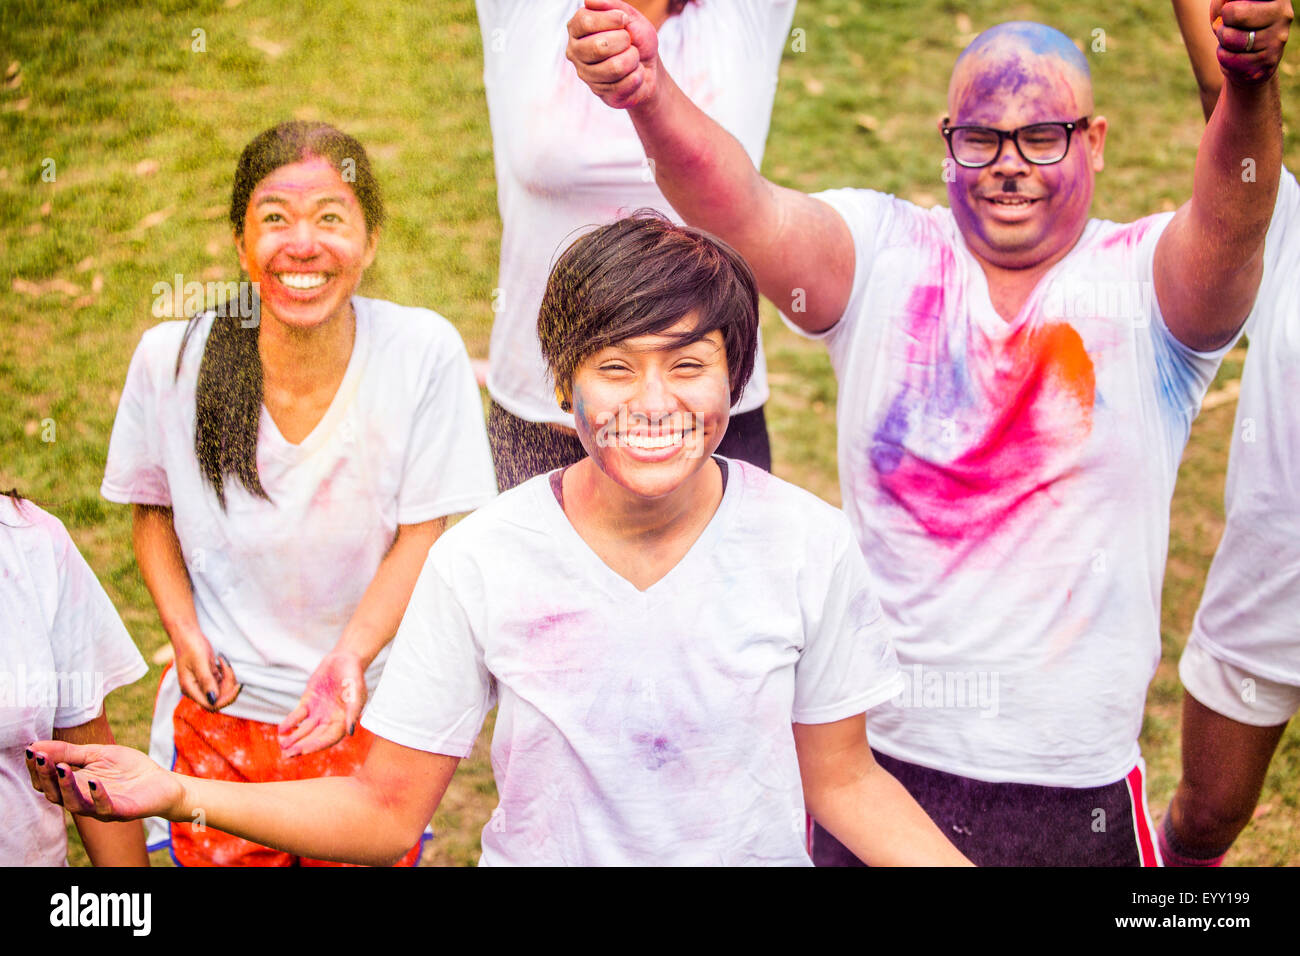 Smiling friends covered in pigment powder cheering Stock Photo